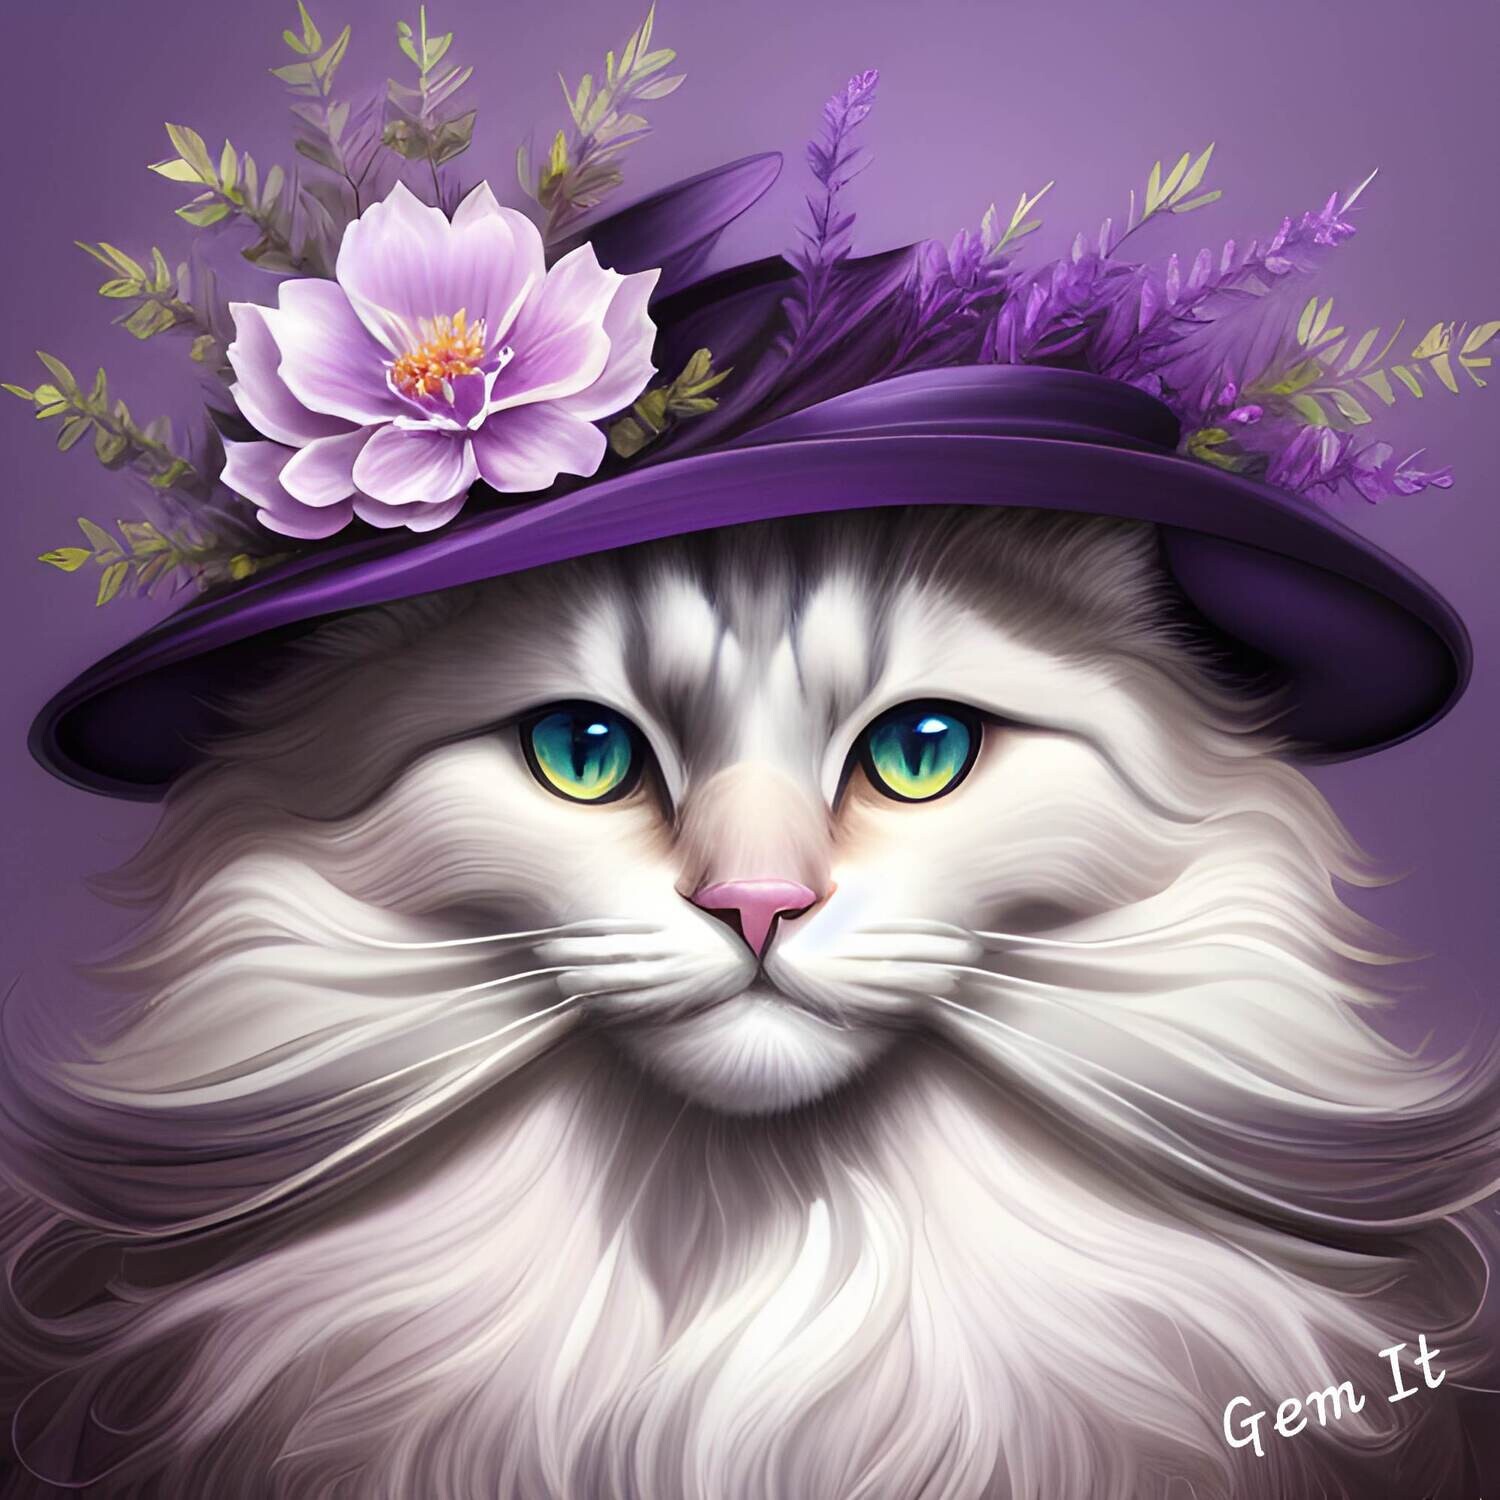 Posh Cat Purple 770 - Full Drill Diamond Painting - Specially ordered for you. Delivery is approximately 4 - 6 weeks.